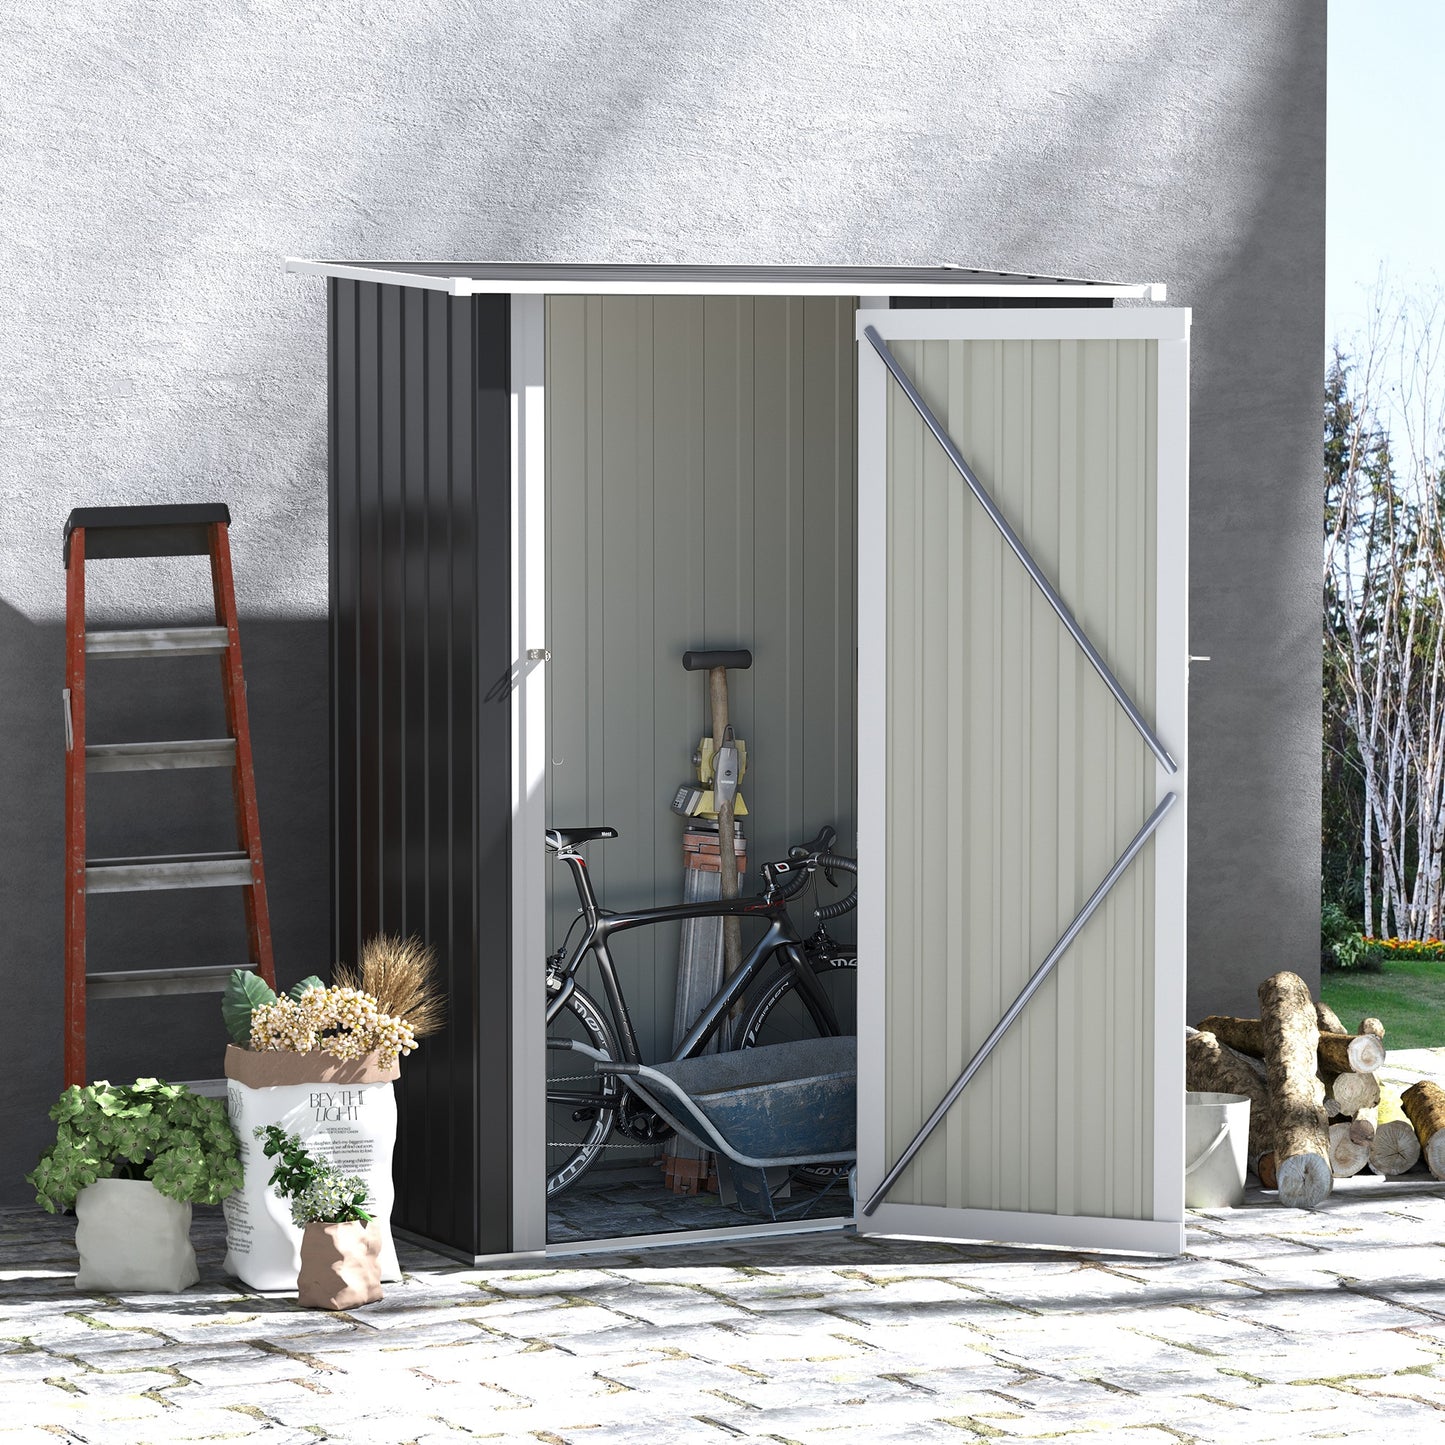 Outsunny Garden Storage Shed, Outdoor Tool Shed with Sloped Roof, Lockable Door for Equipment, Bikes, Grey, 142 x 84 x 189cm